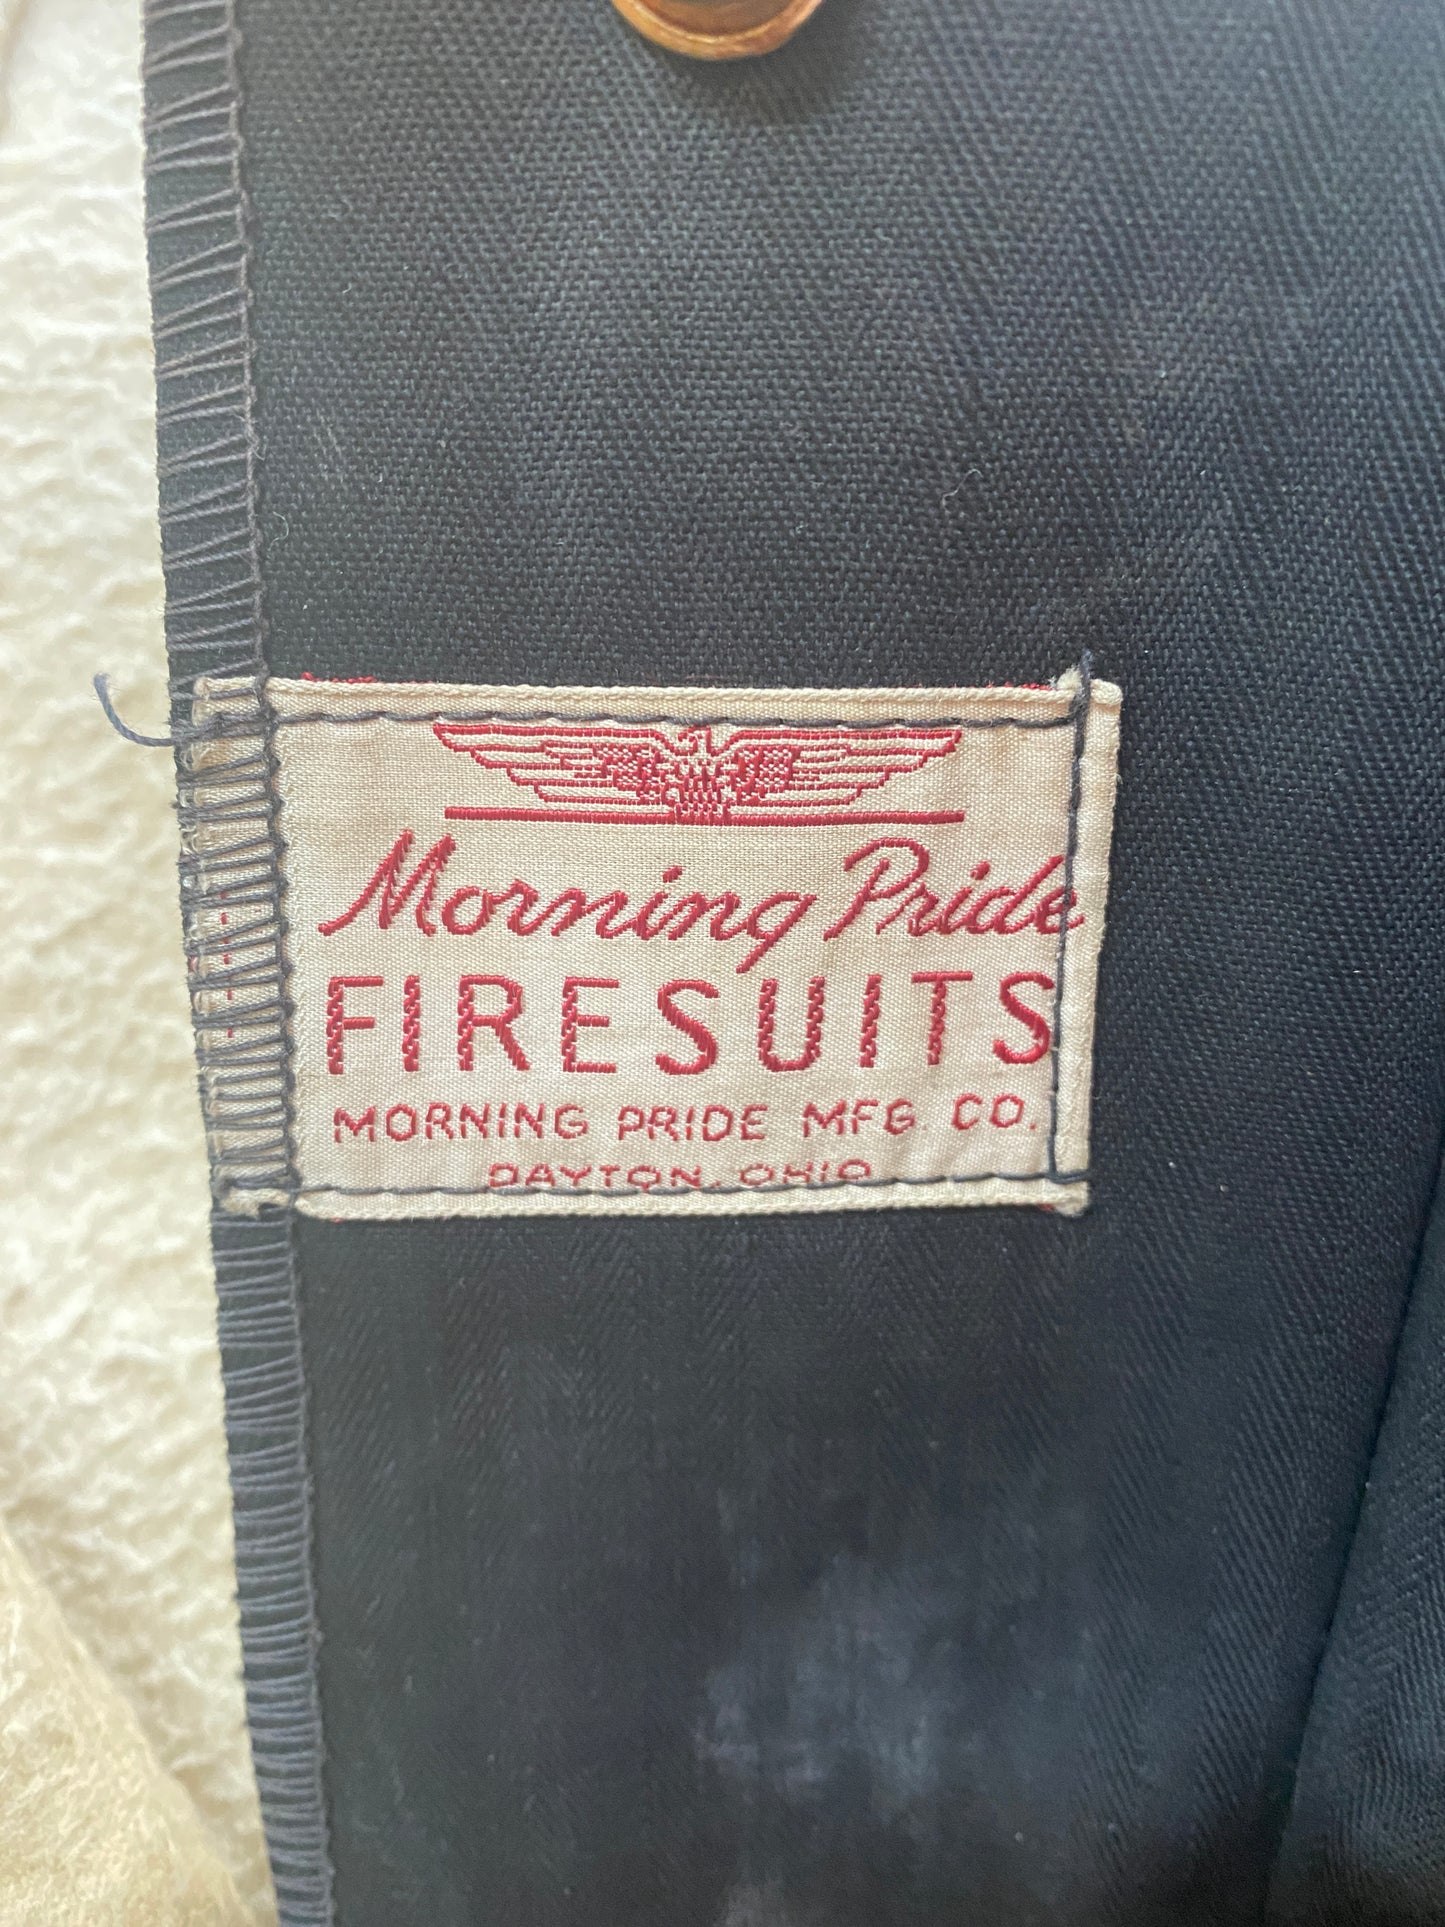 40s/50s Morning Pride Firesuits Flannel-Lined HBT Work Pants Size 33 x 26"